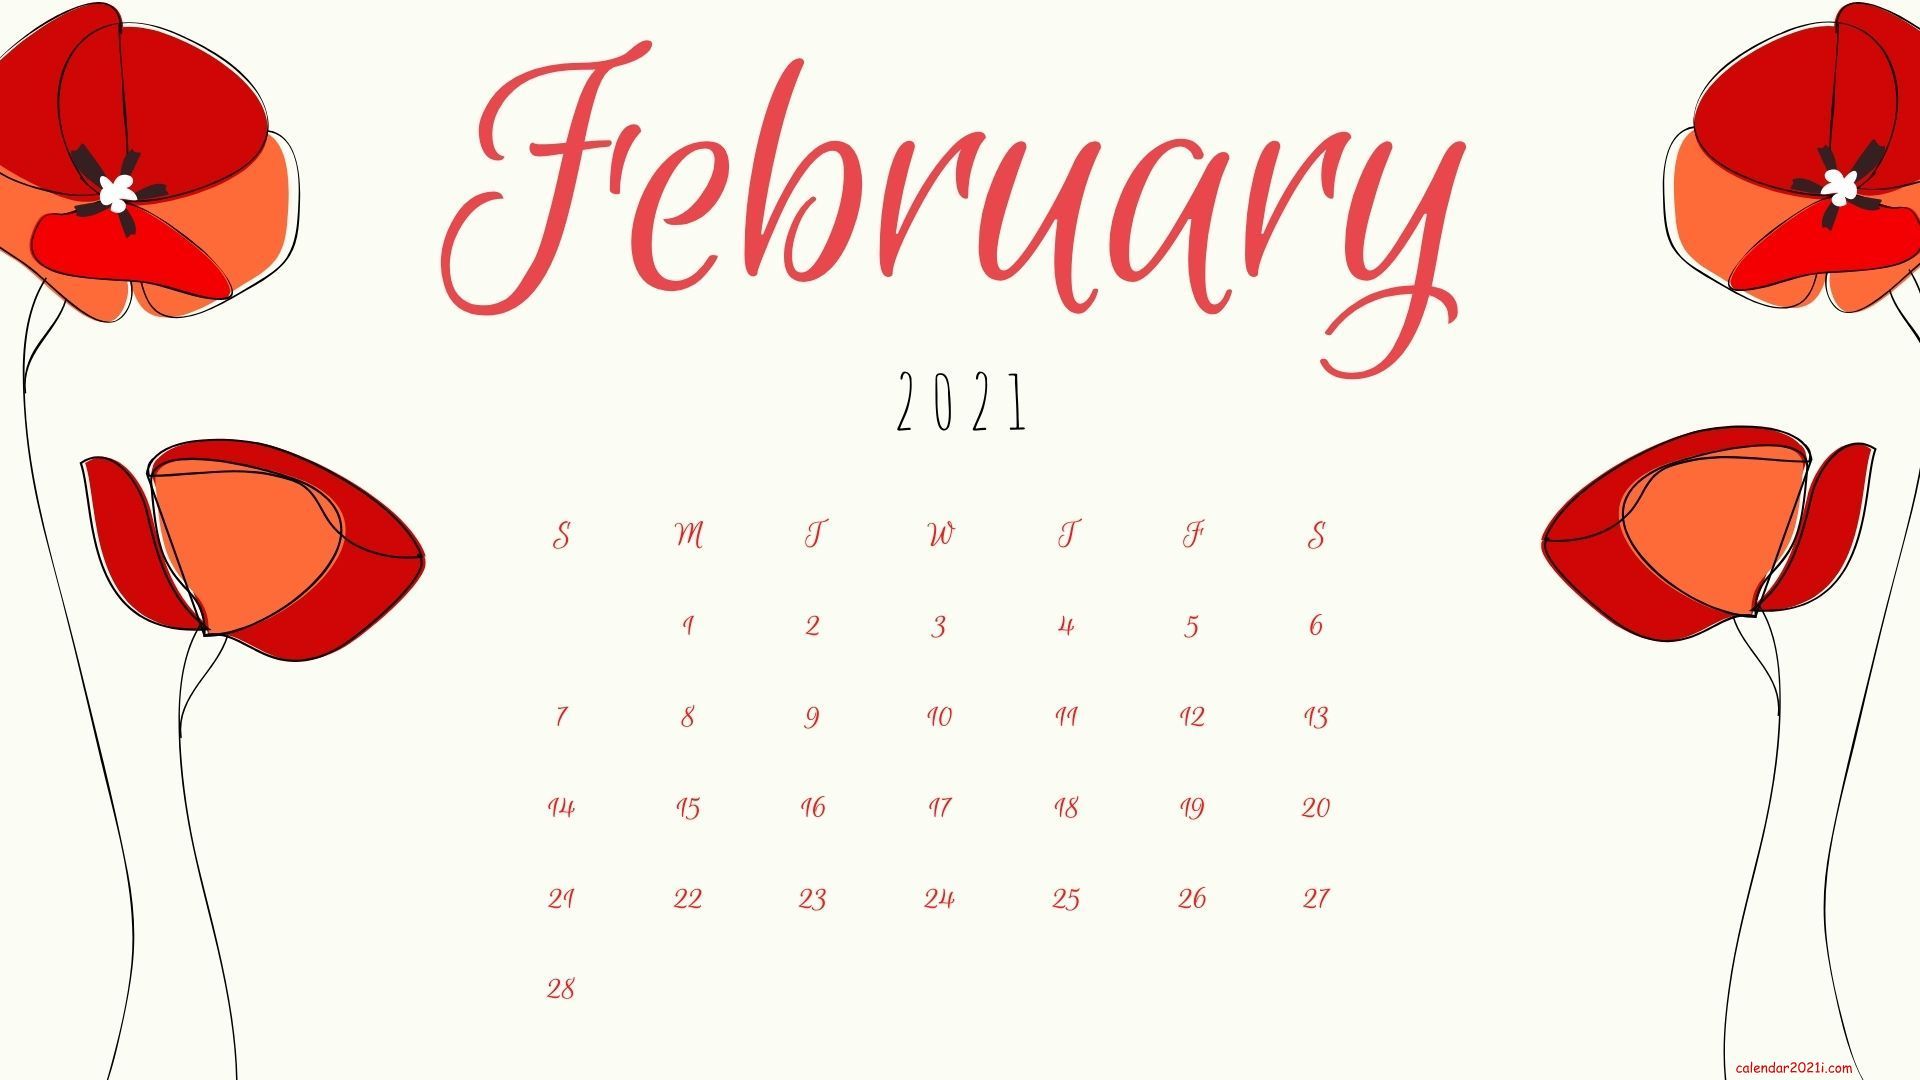 Free download Pin on 2021 Calendars 1920x1080 for your Desktop